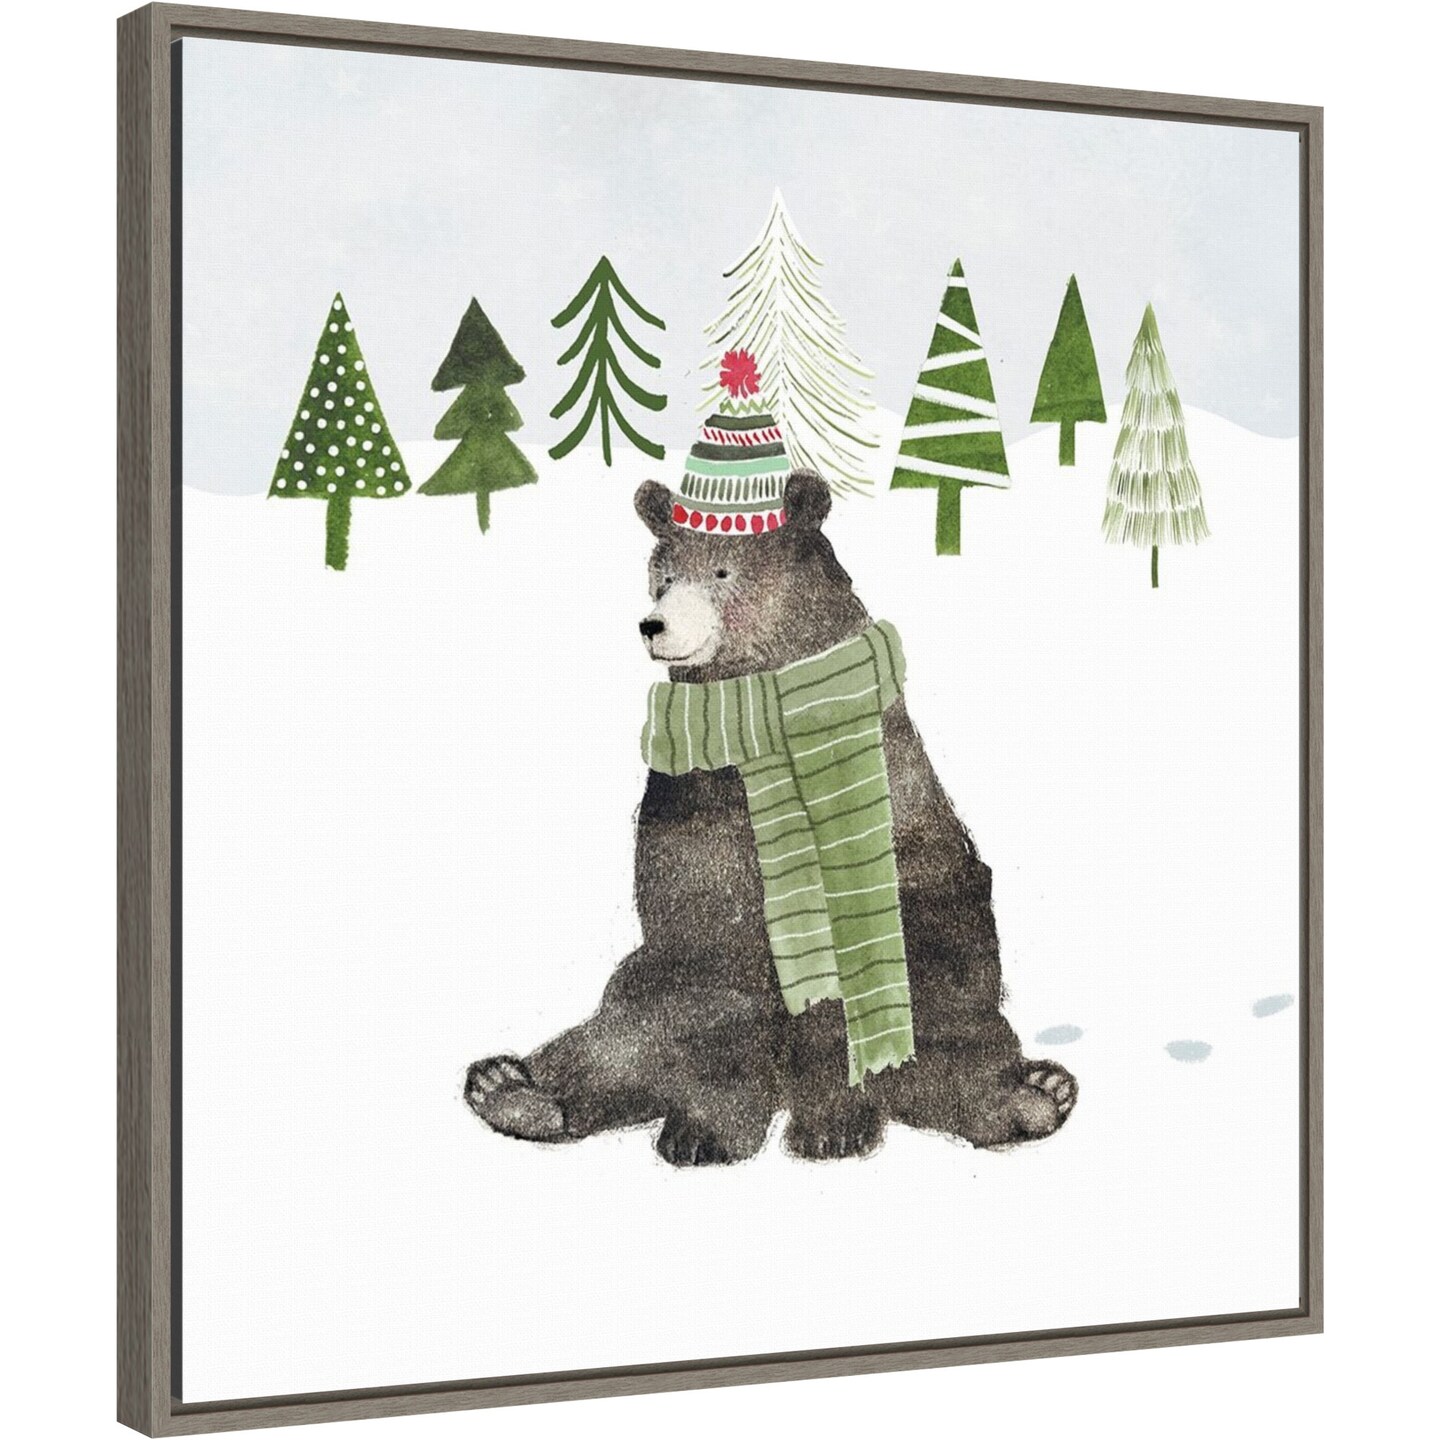 Woodland Christmas IV by Victoria Borges 22-in. W x 22-in. H. Canvas Wall Art Print Framed in Grey